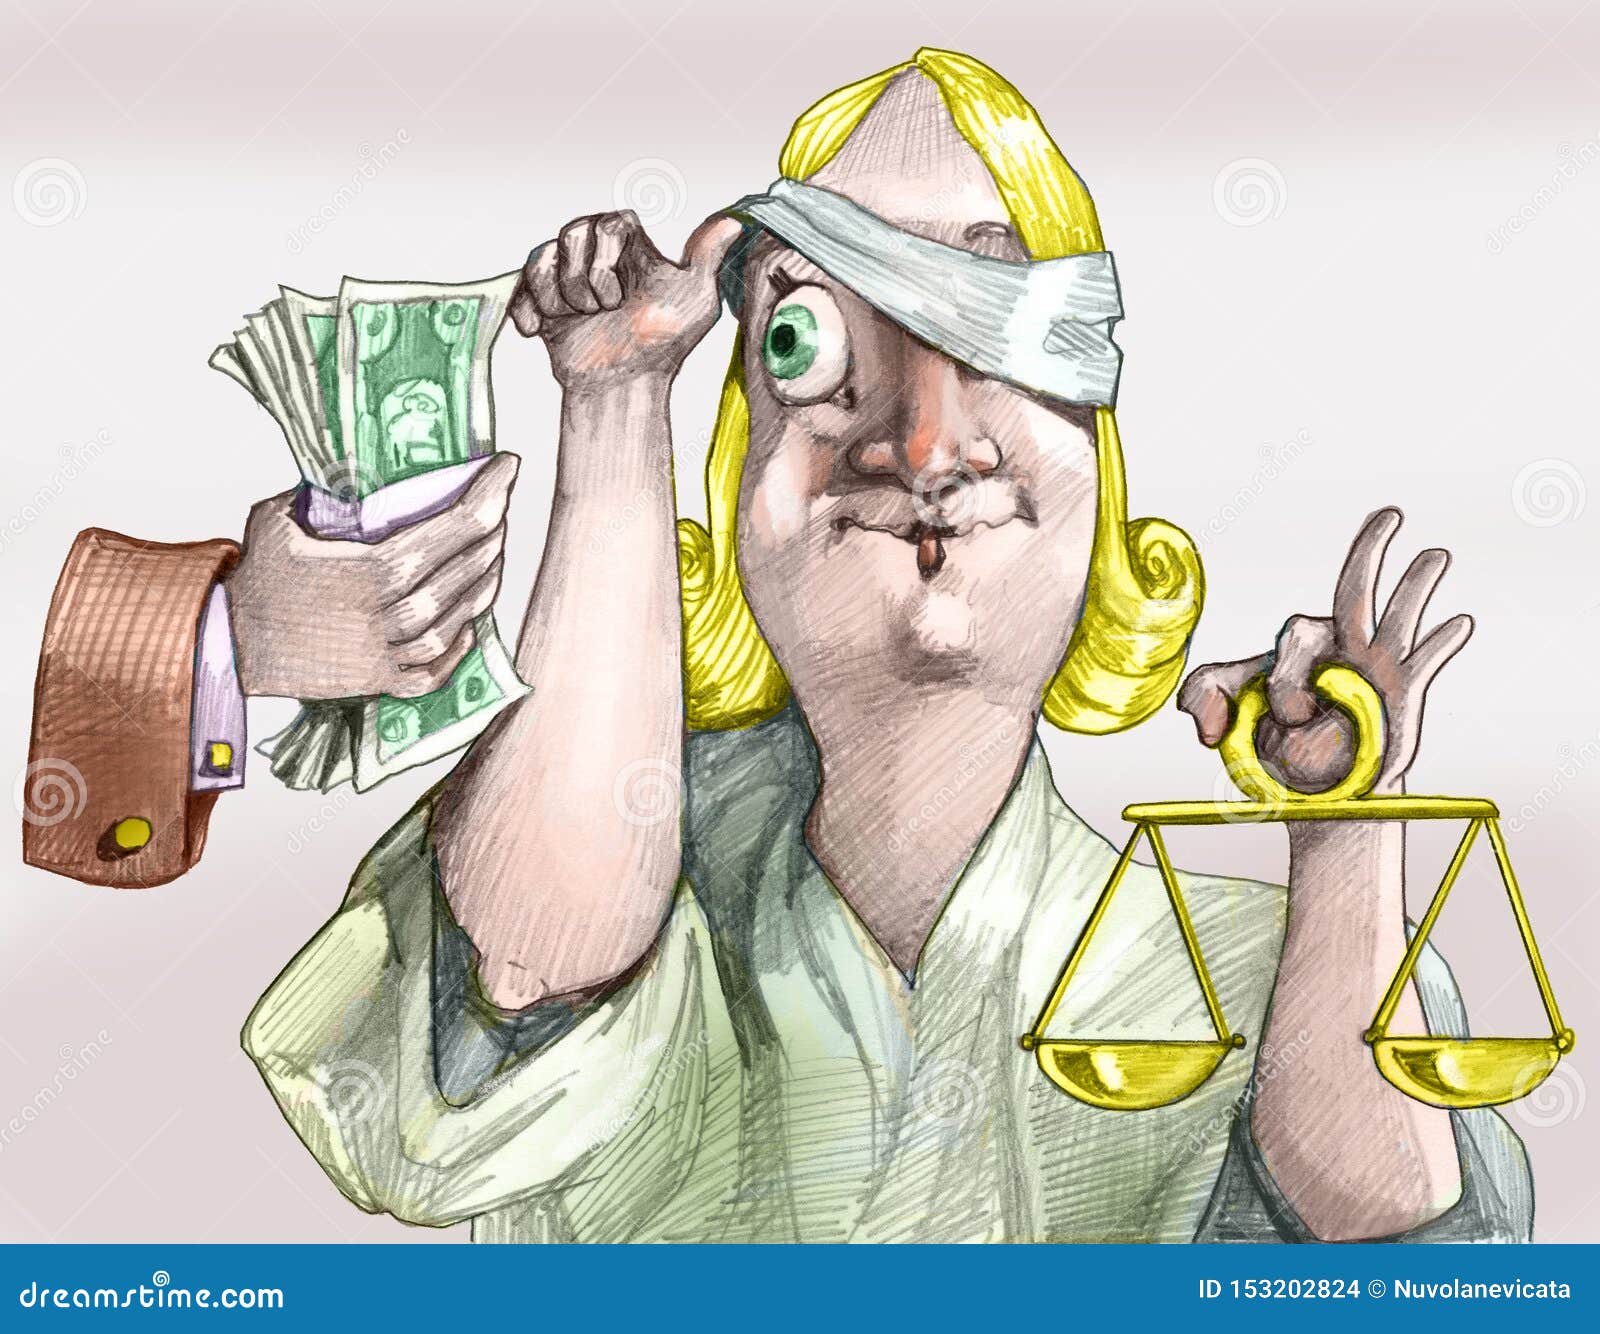 justice-not-blind-hand-offers-money-to-moves-bandage-look-greedy-political-cartoon-153202824.jpg